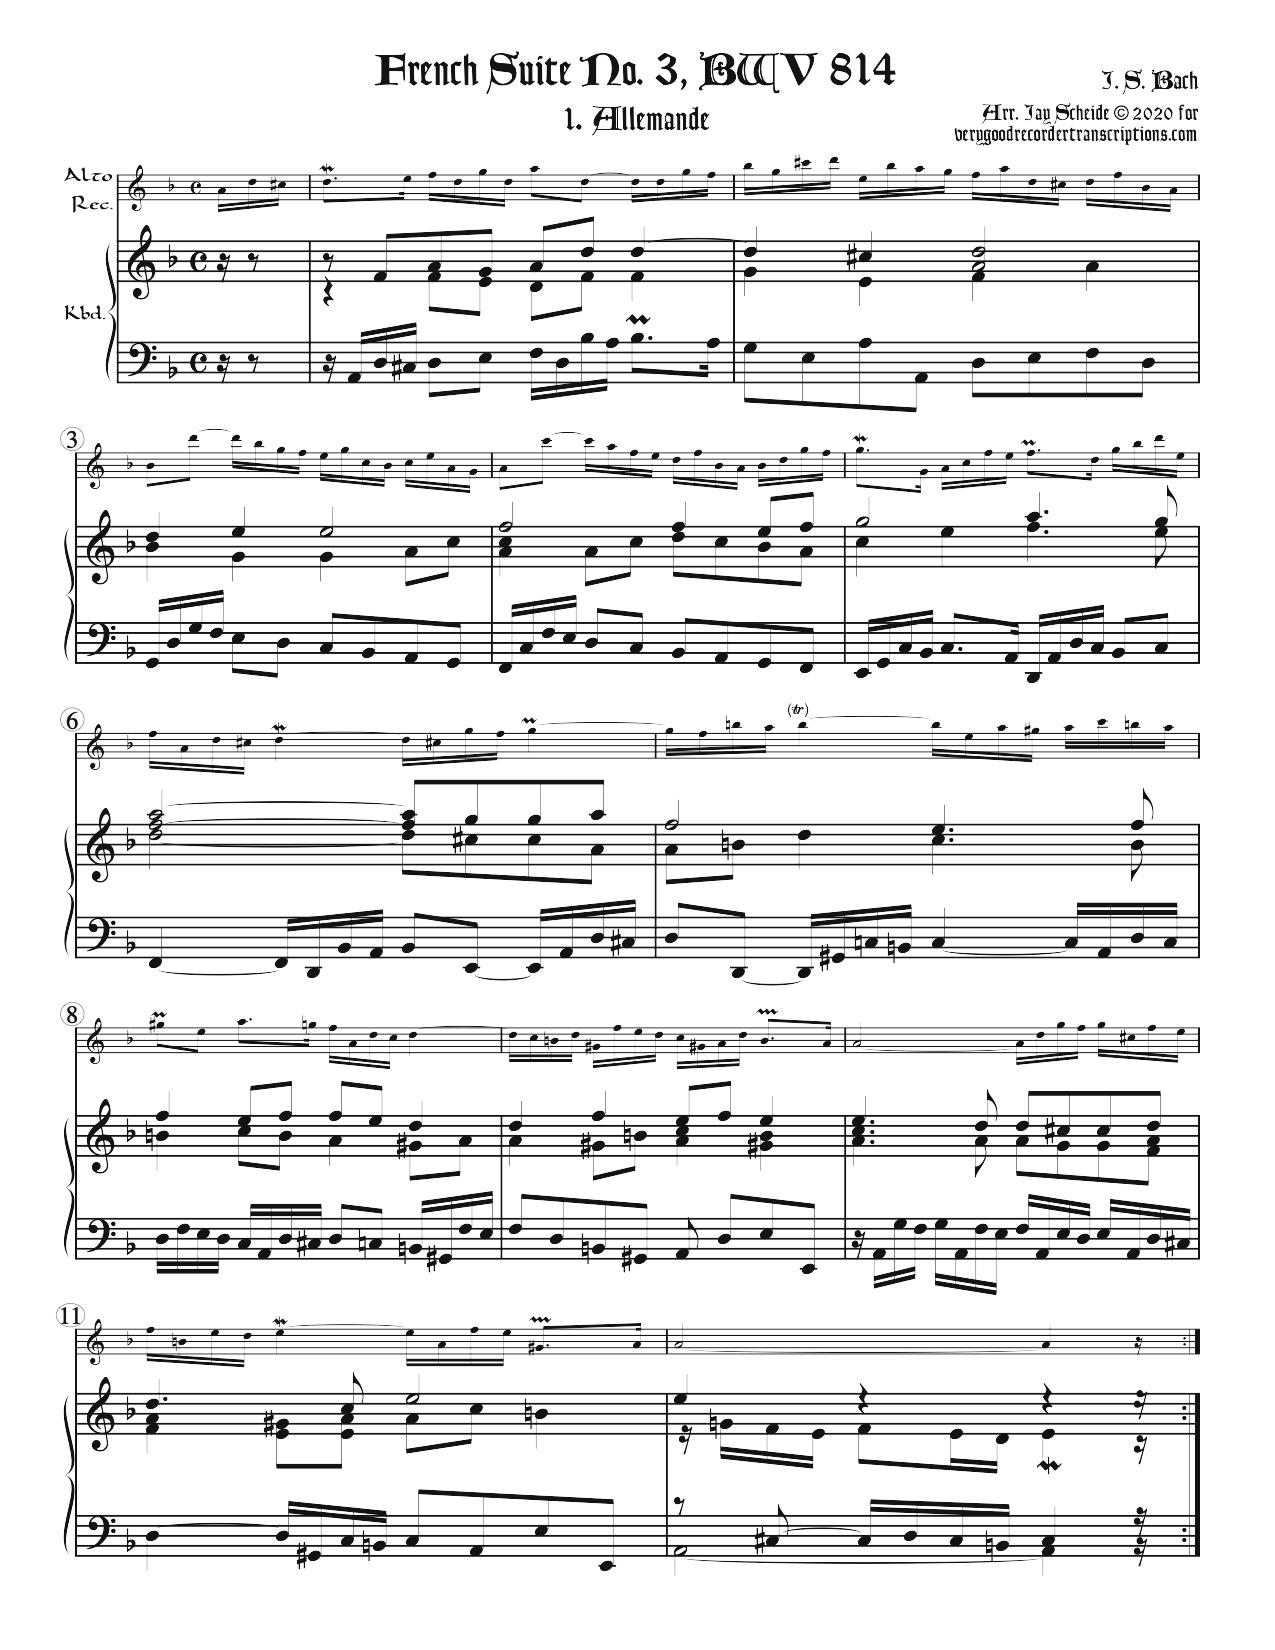 French Suite No. 3, BWV 814 complete